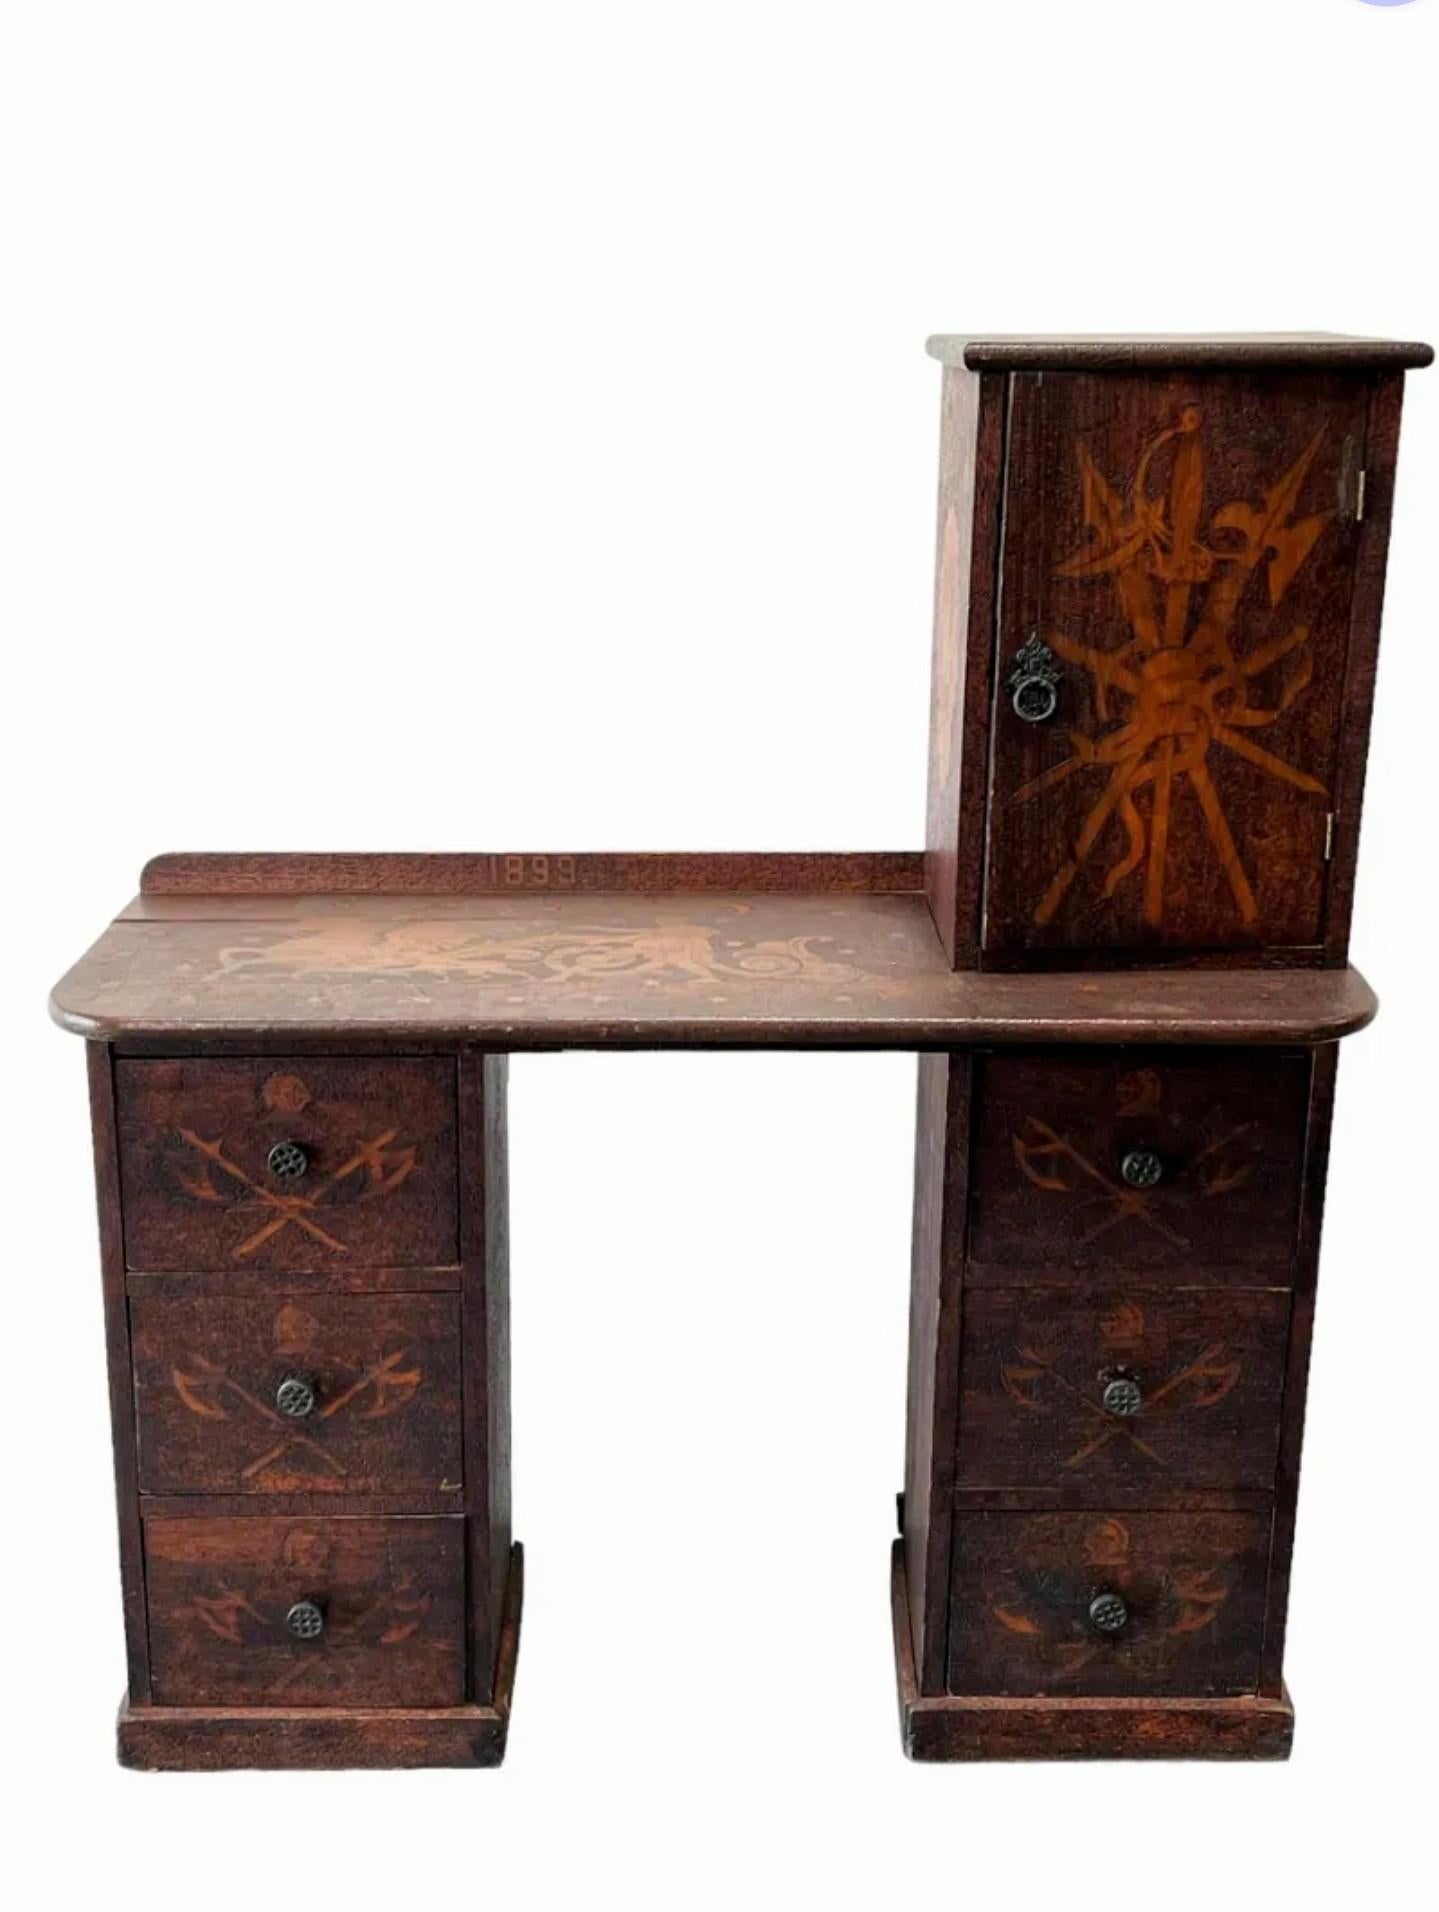 Rare Early American Country Pyrography Desk For Sale 7